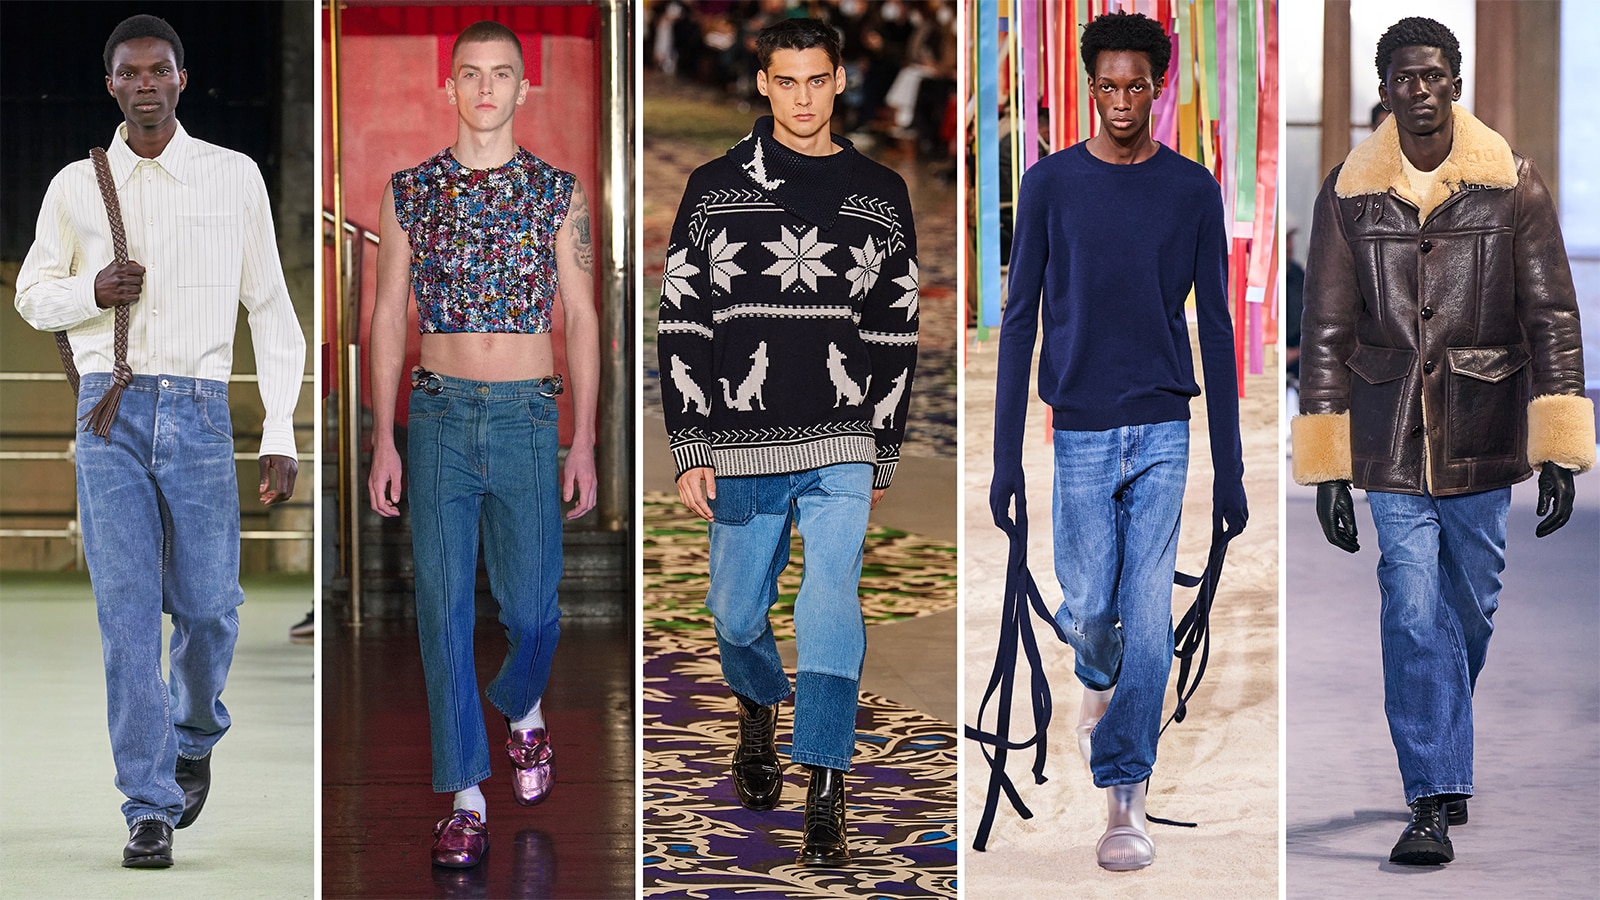 Fashion: Why “Boring” Blue Jeans Are Back | The Journal | MR PORTER